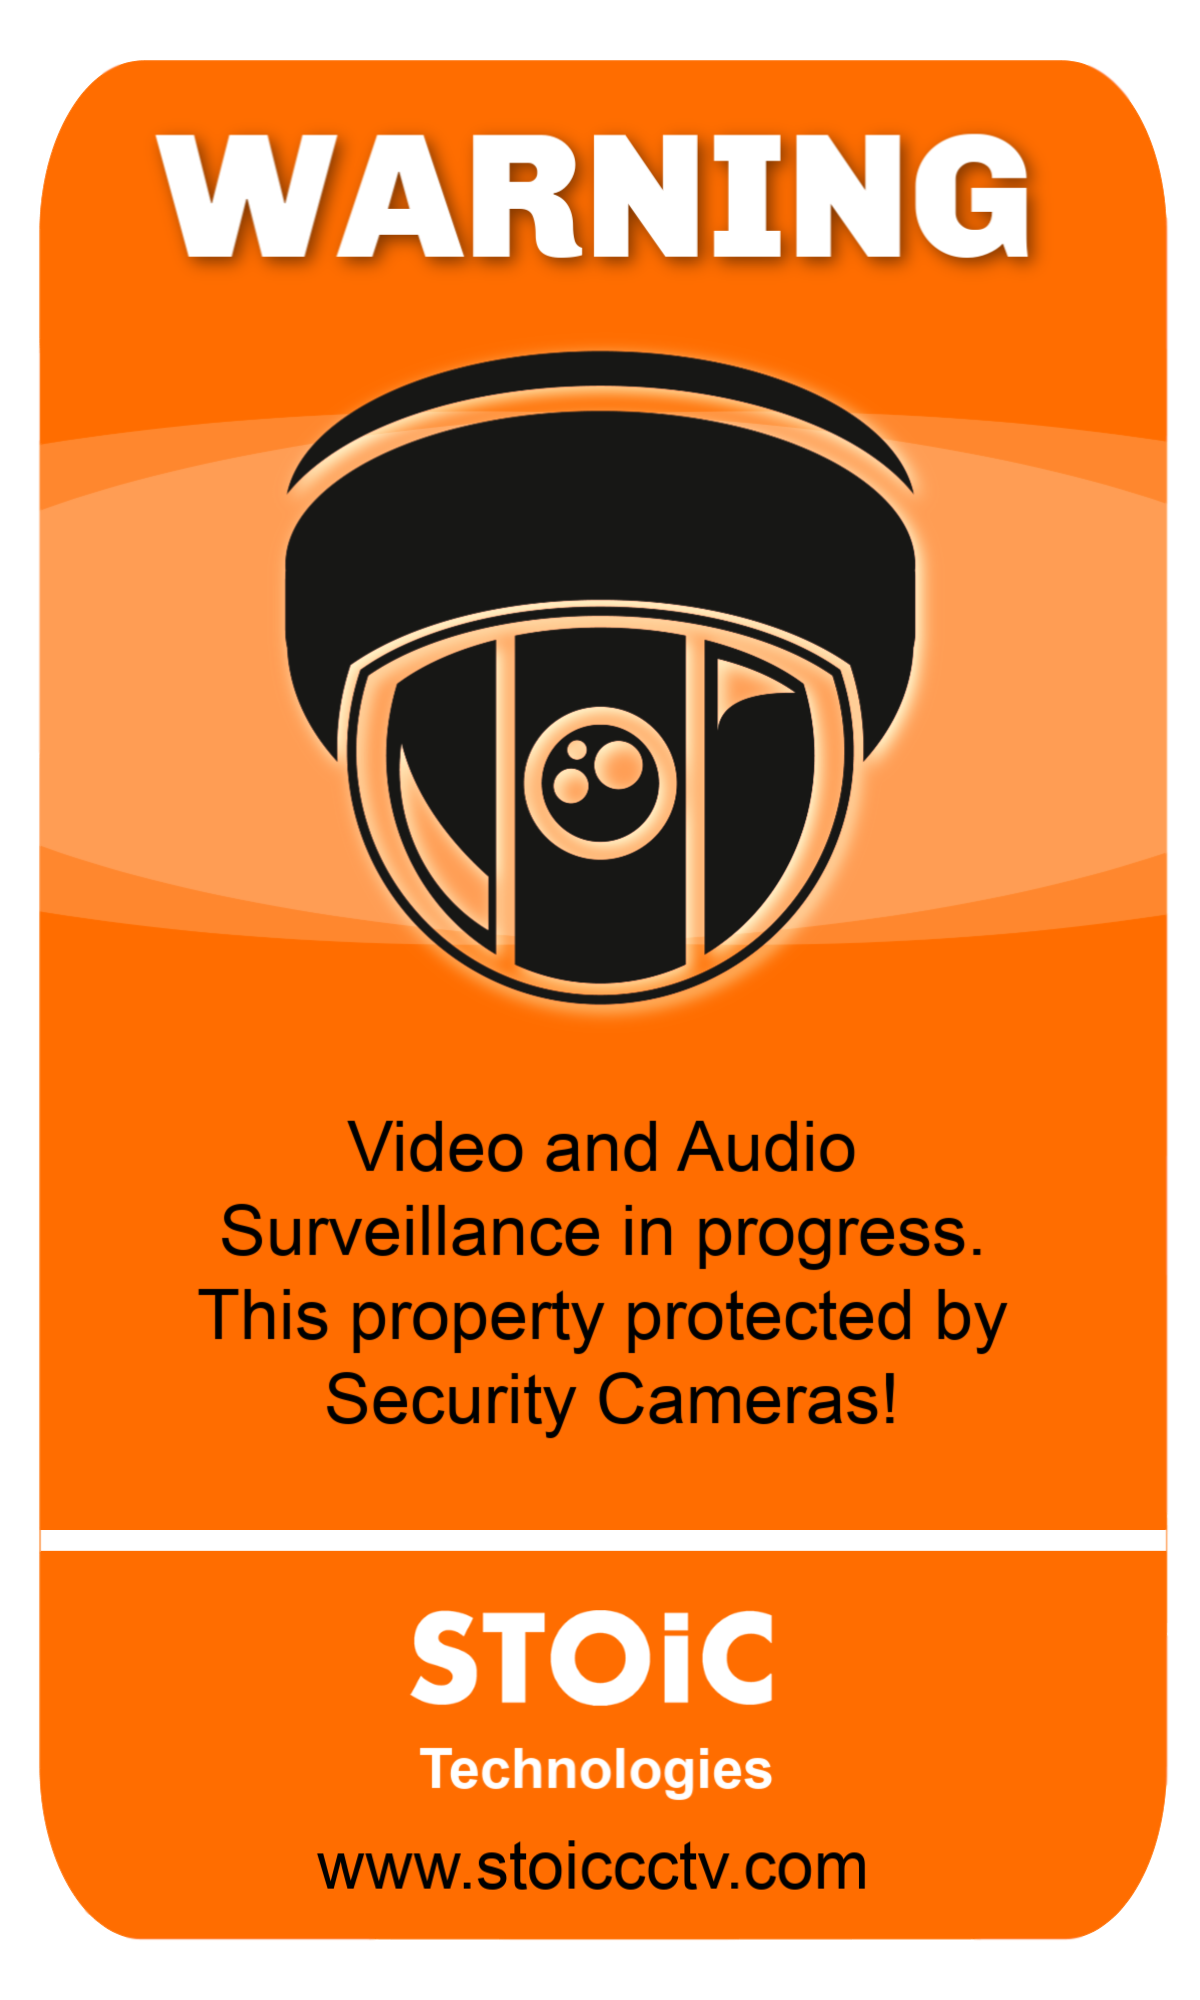 Camera Sticker Security CCTV Sign All Sizes & Materials Warning 